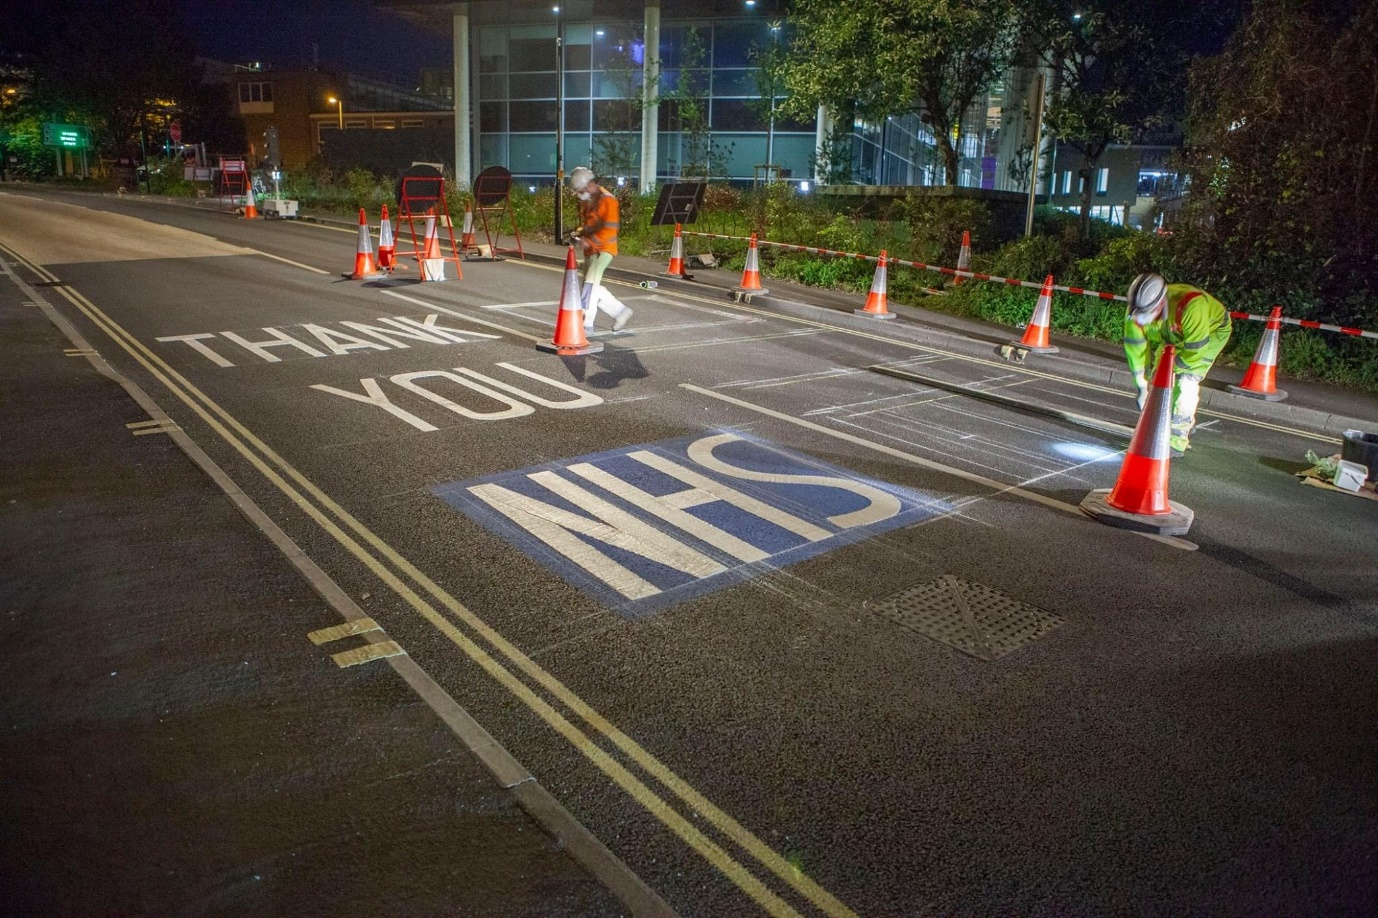 'Thank you NHS' being painted on the road outside the hospital